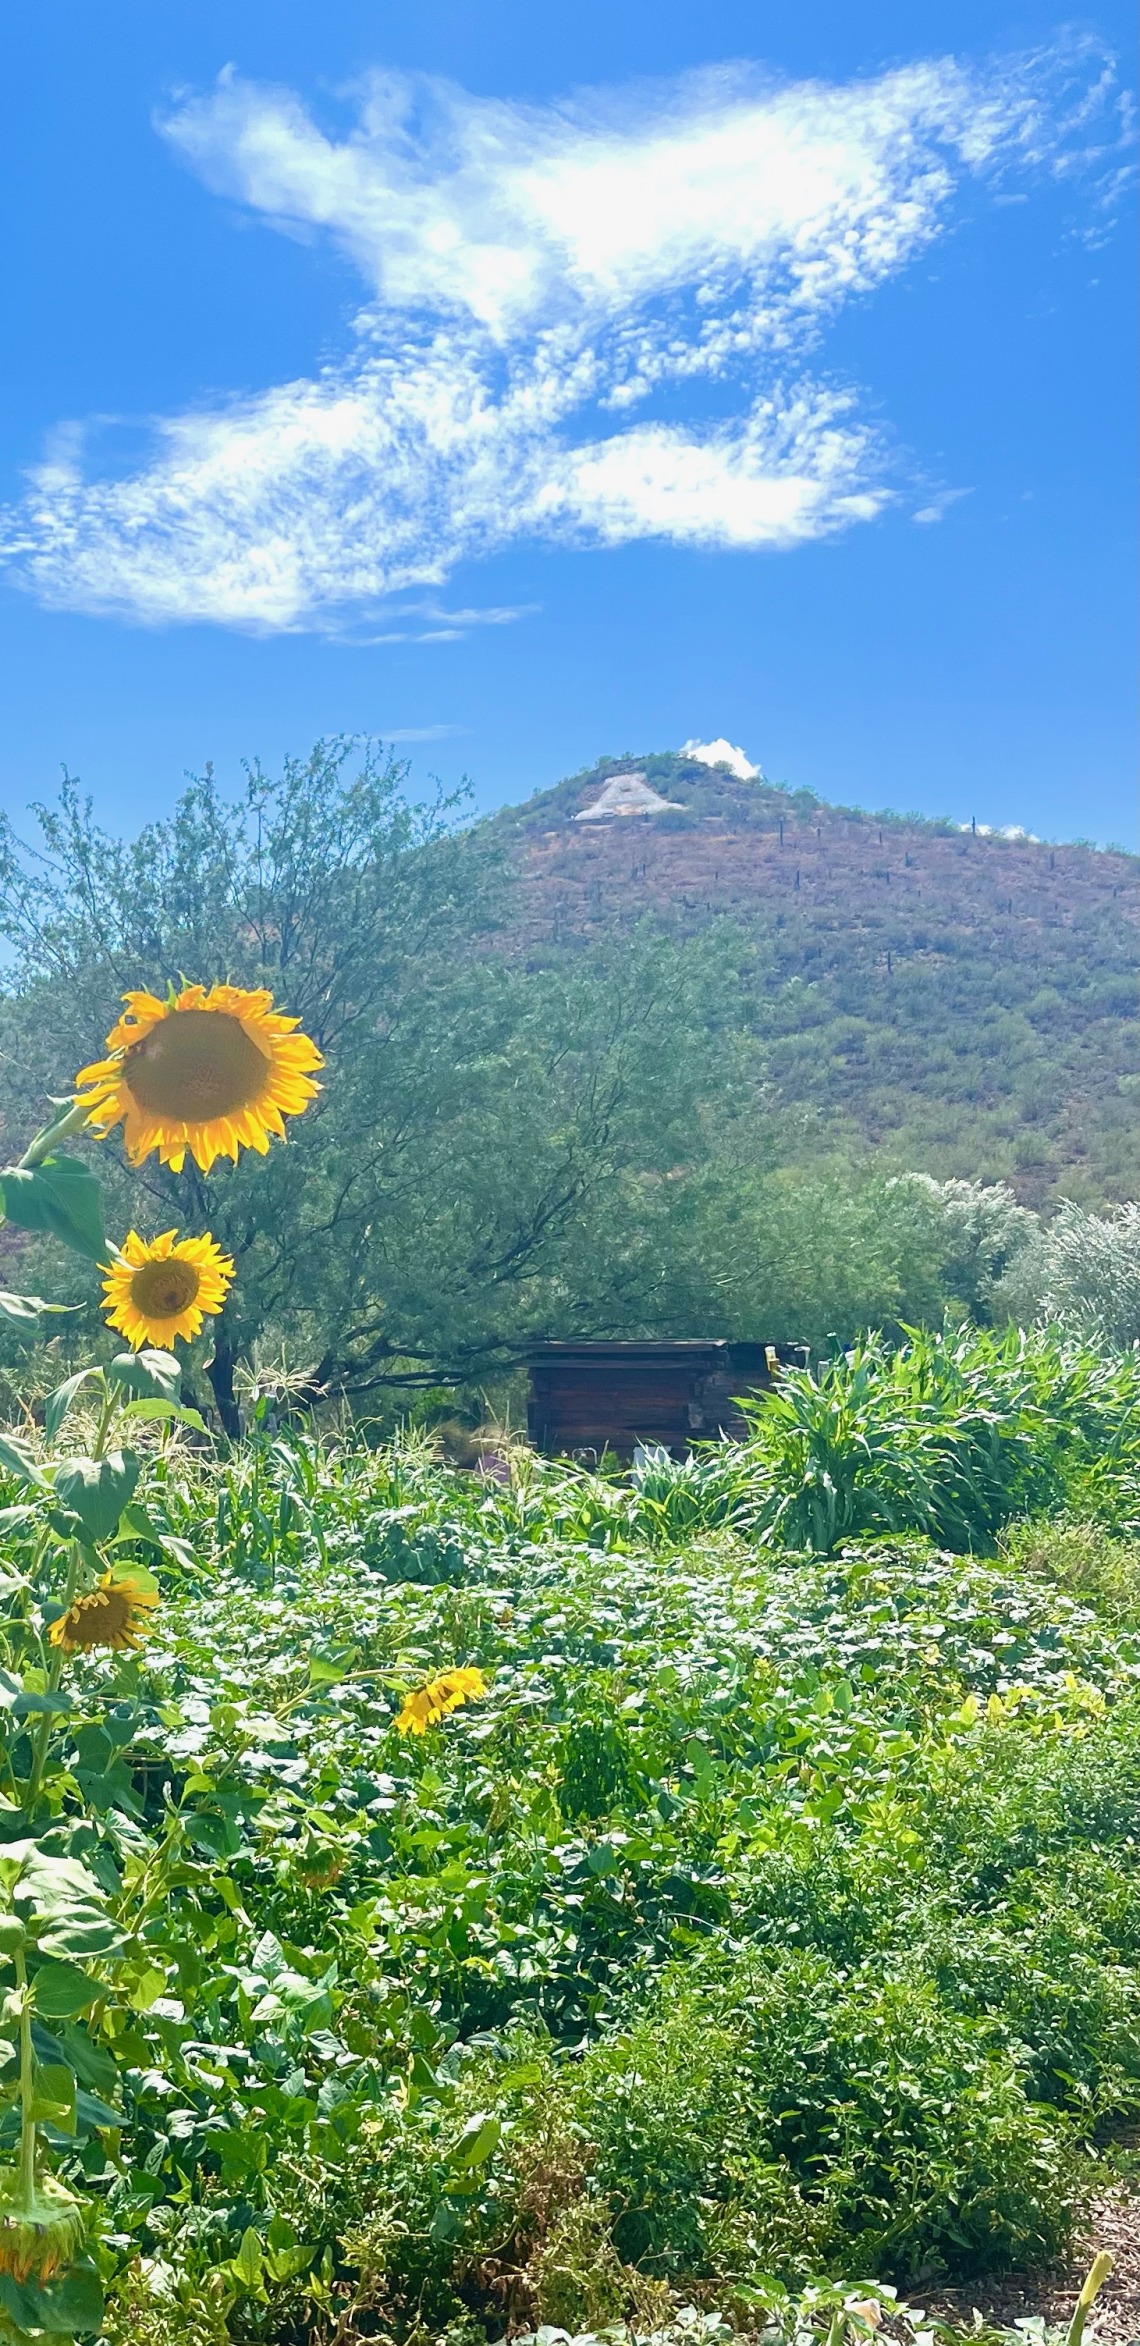 A photo of "A Mountain" with sunflowers.   